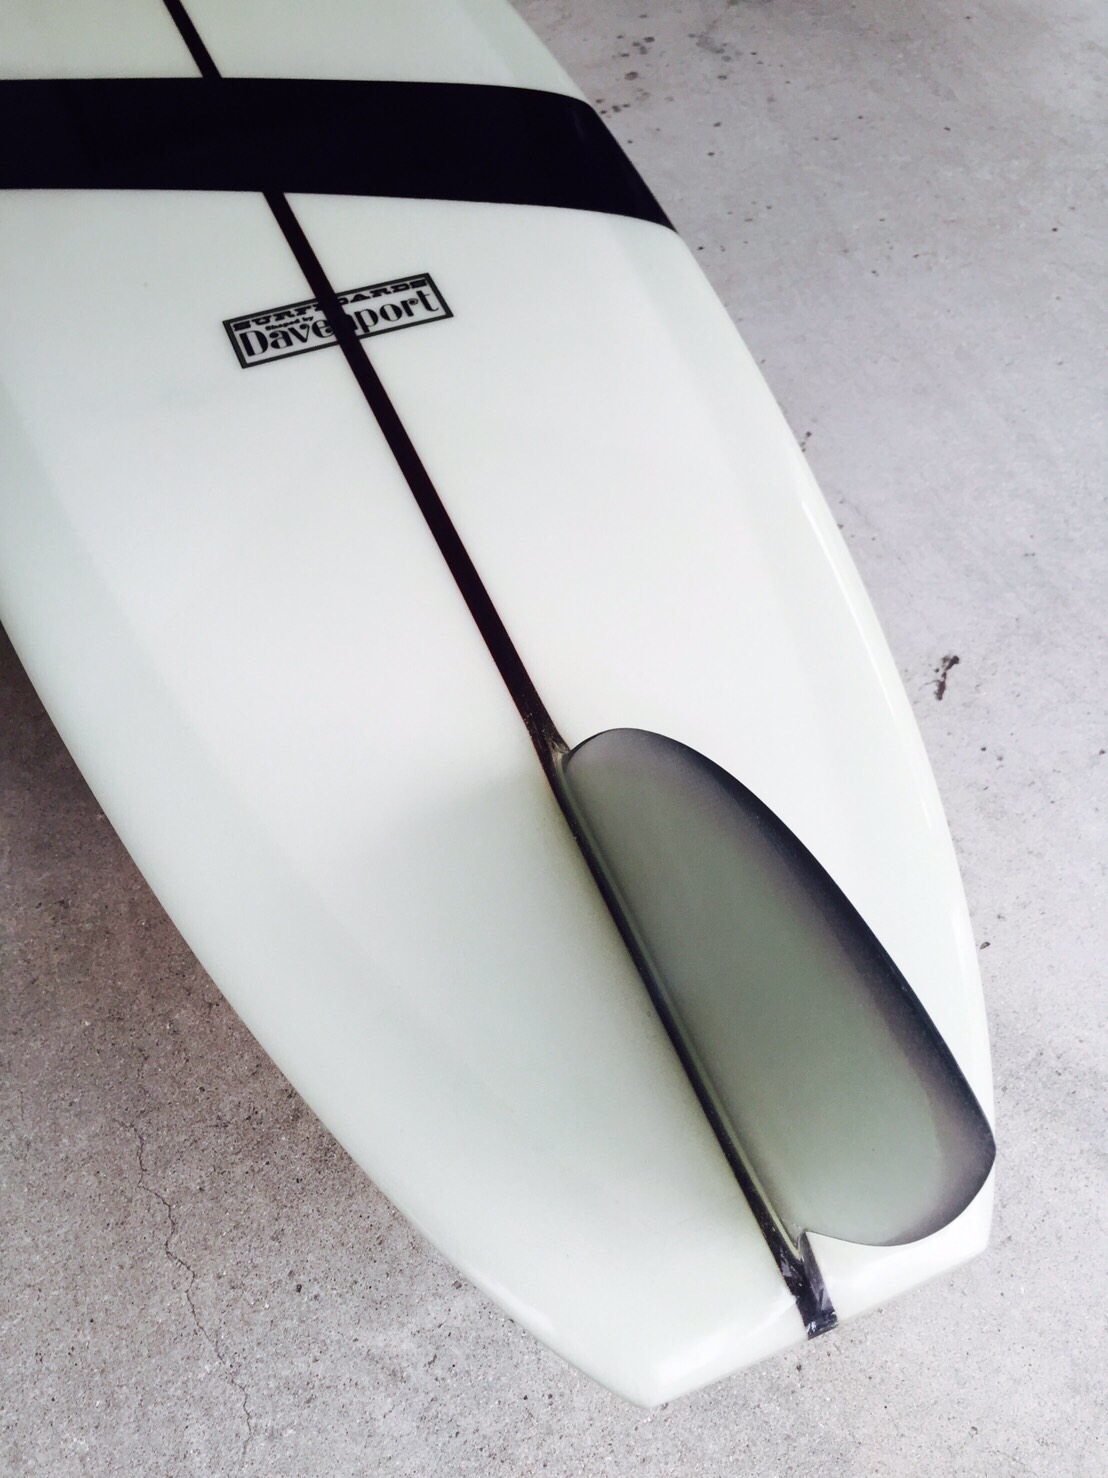 ○○○LOOP○○○: DAVENPORT SURFBOARDS - THE PIG 9'6”(FORSALE）